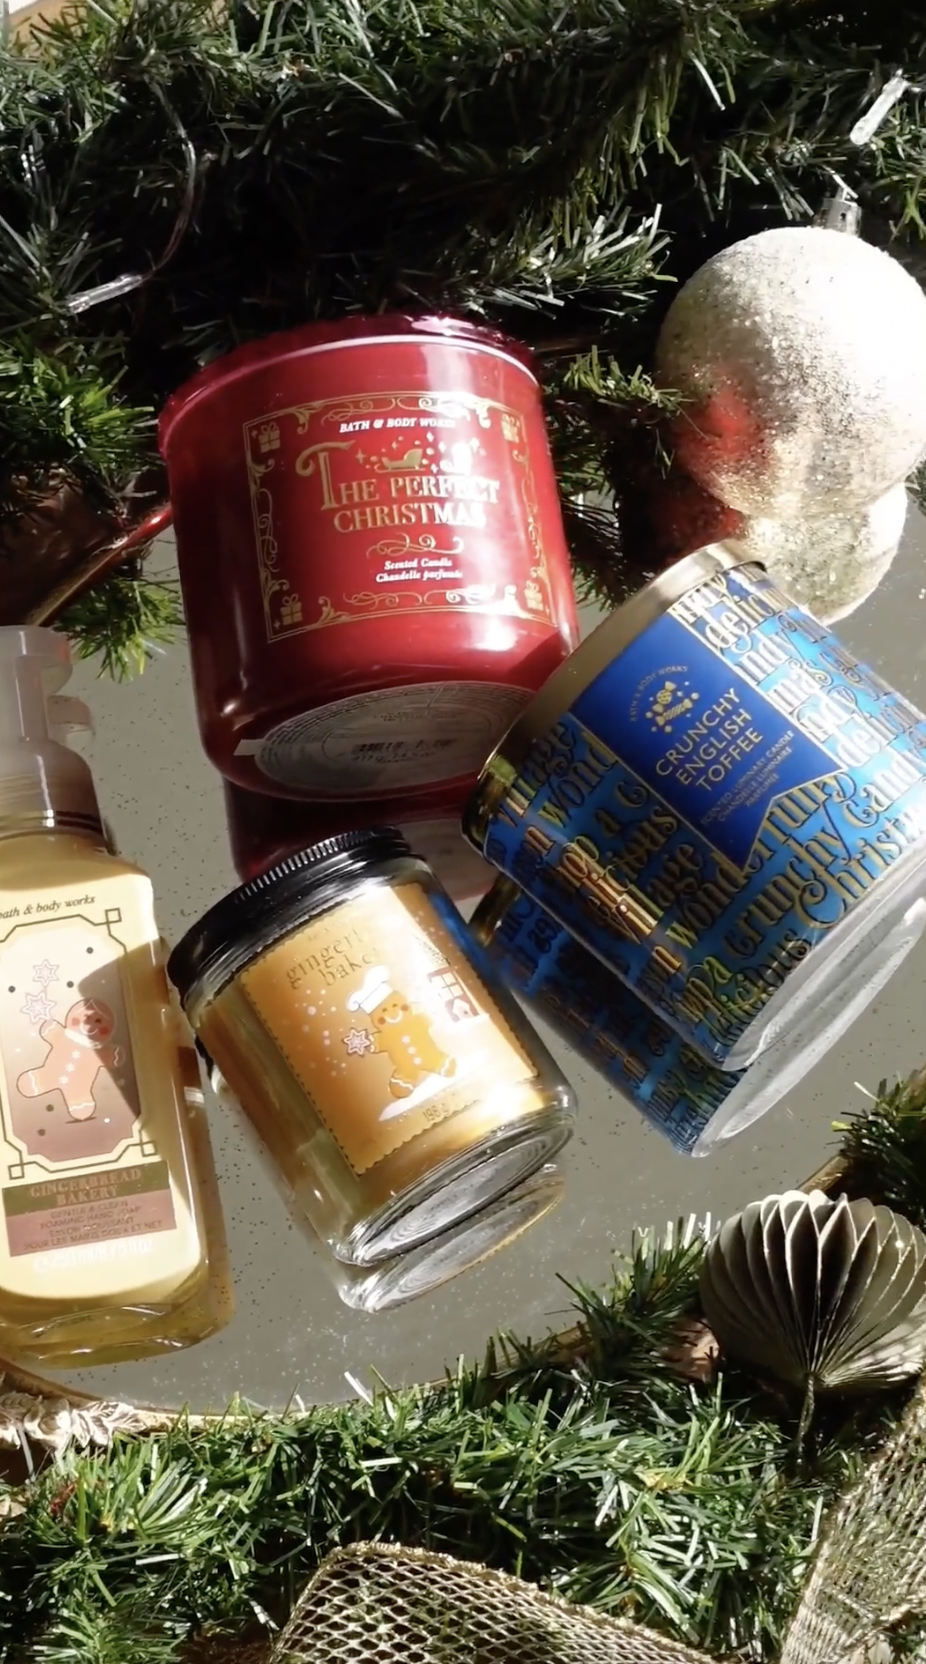 Holiday candles from Bath & Body Works.